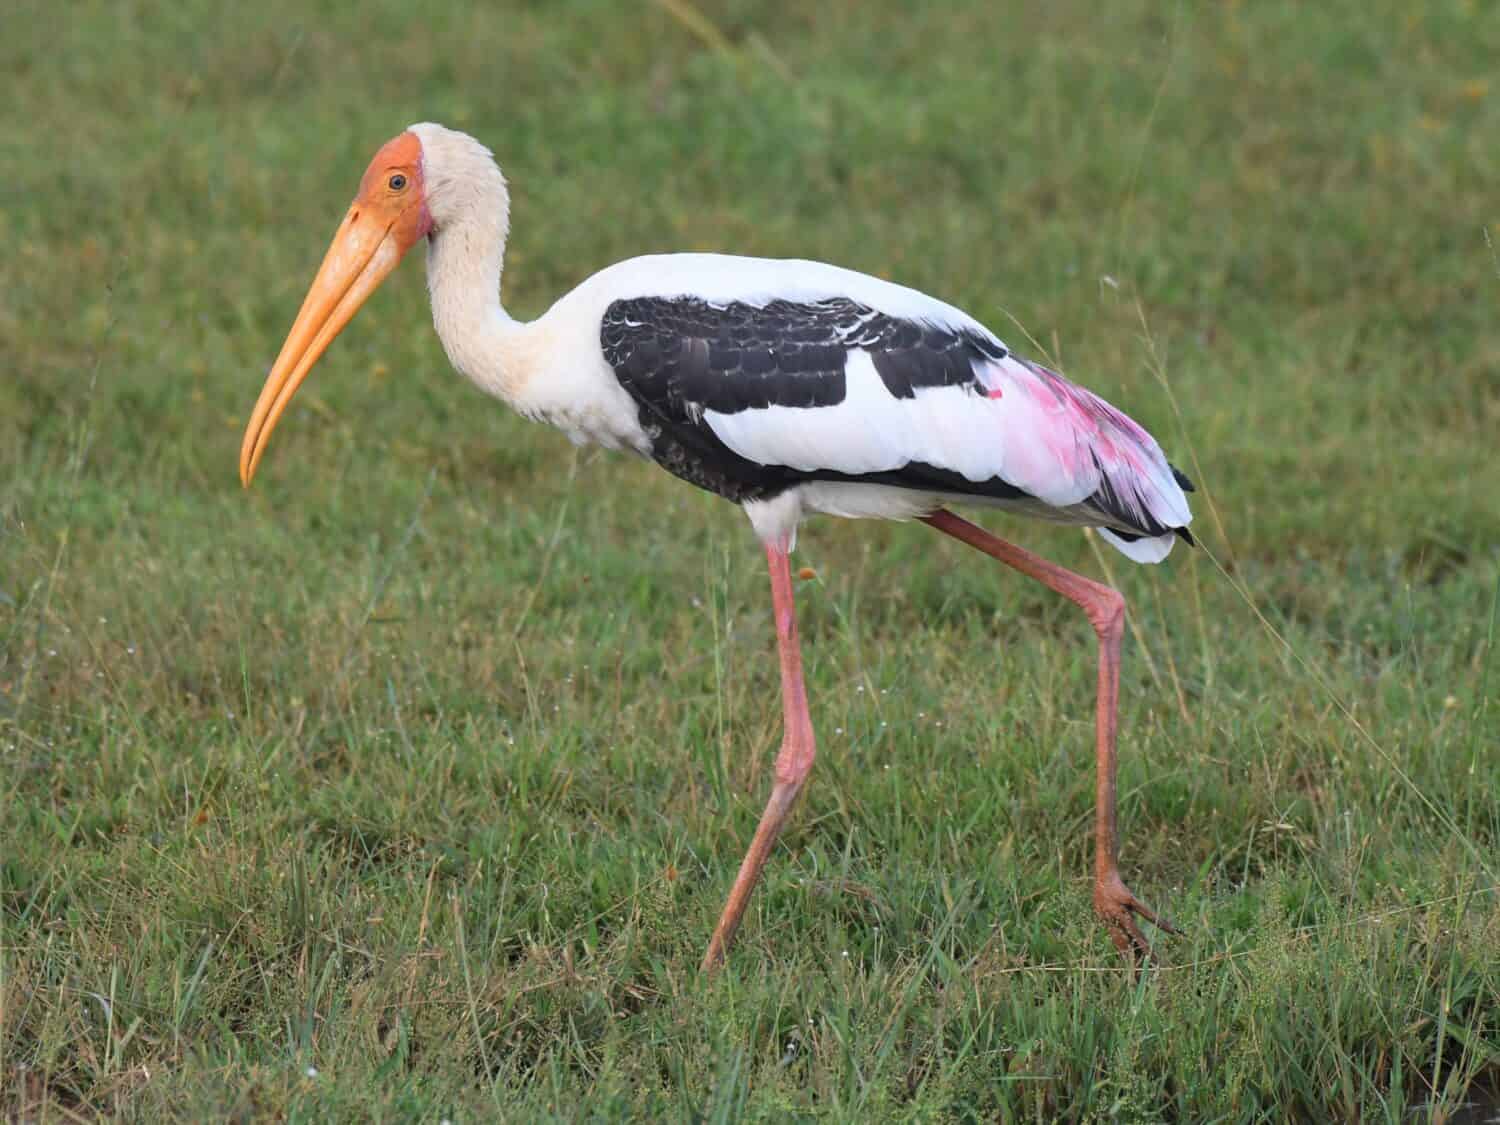 The painted stork  is a large wader in the stork family. It is found in the wetlands of the plains of tropical Asia south and Indian subcontinent.